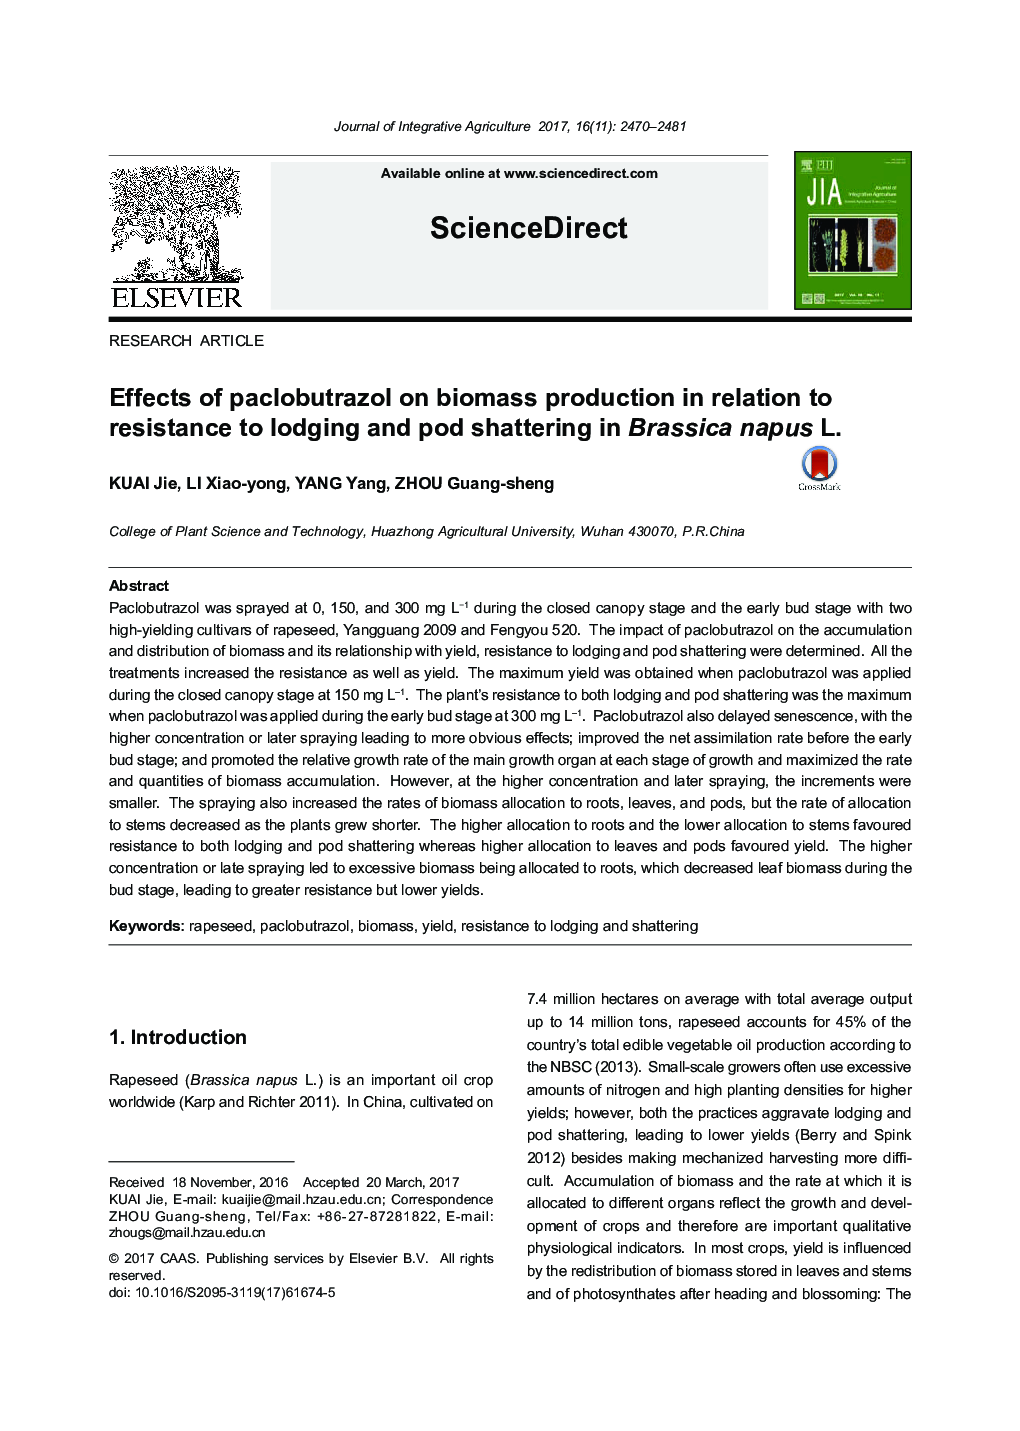 Effects of paclobutrazol on biomass production in relation to resistance to lodging and pod shattering in Brassica napus L.